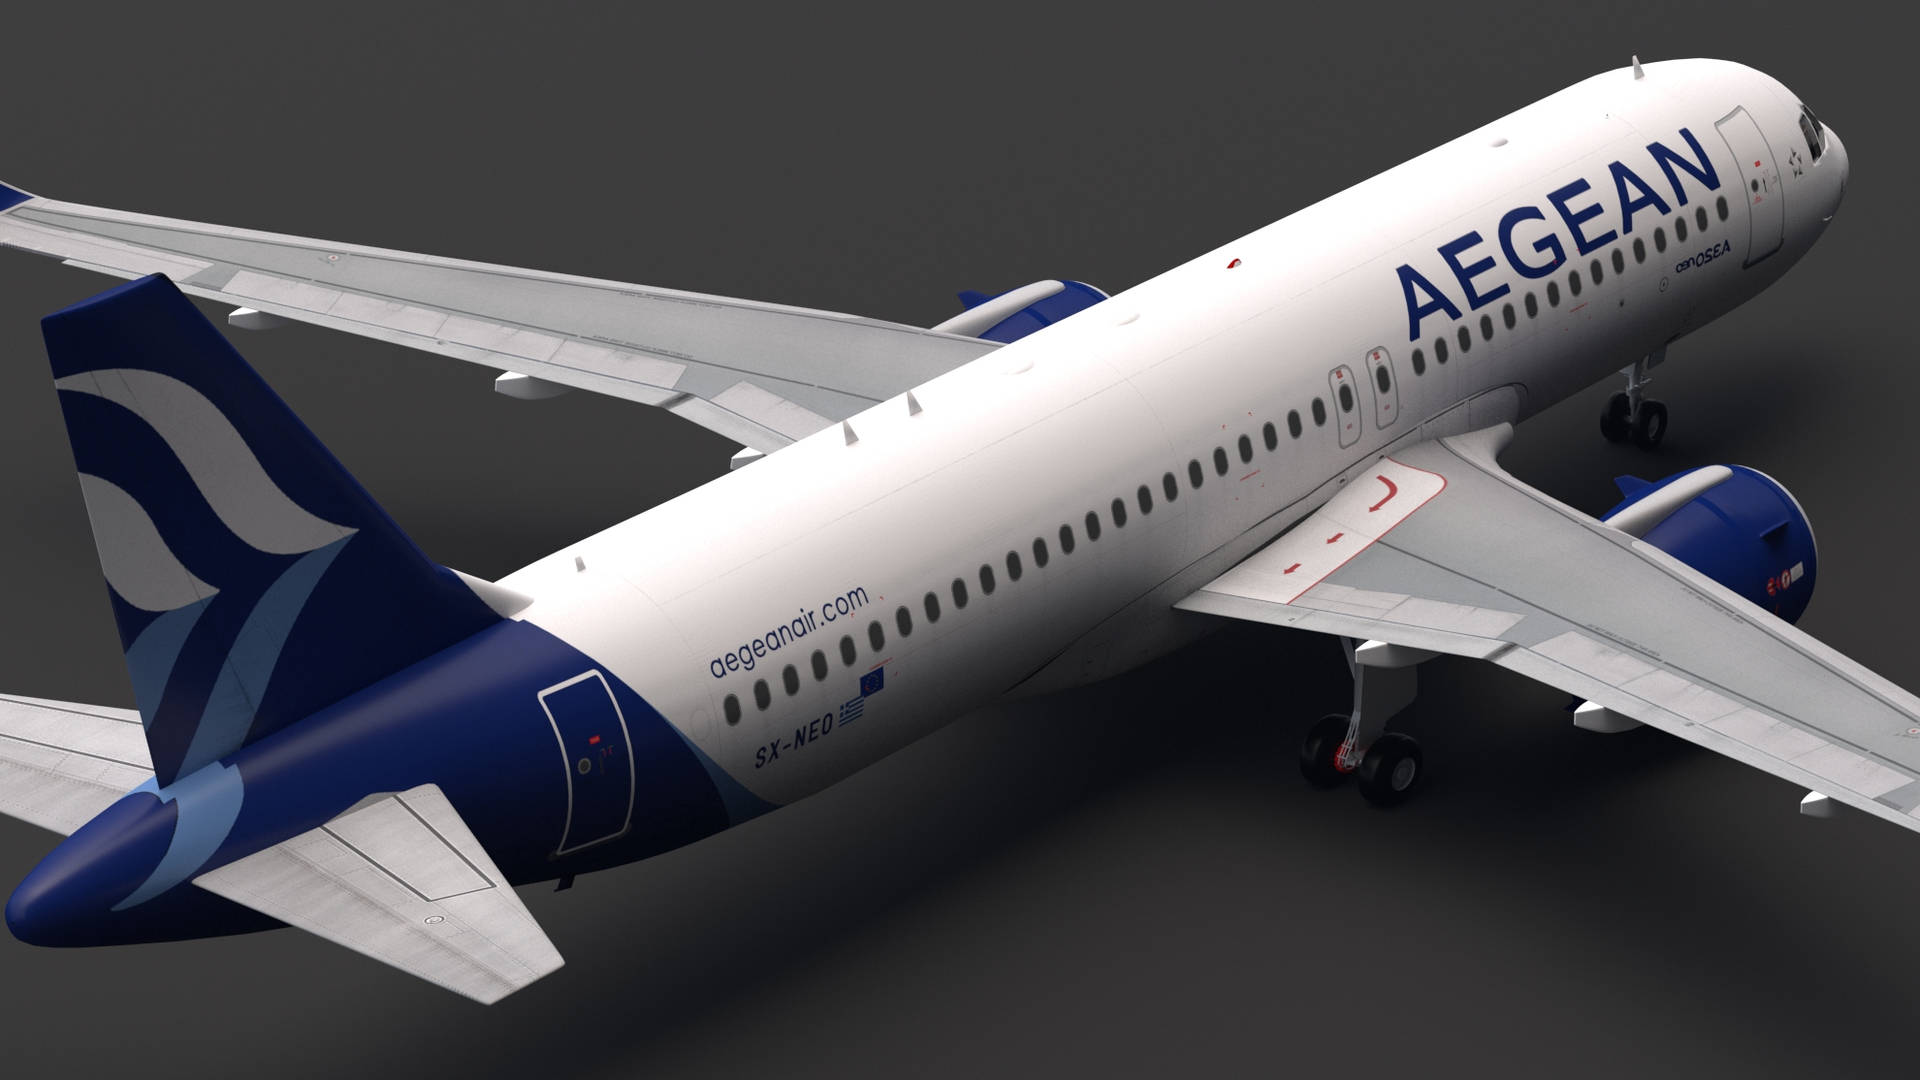 Aegean Airlines Flag Carrier Airbus A320 3d Model Wallpaper